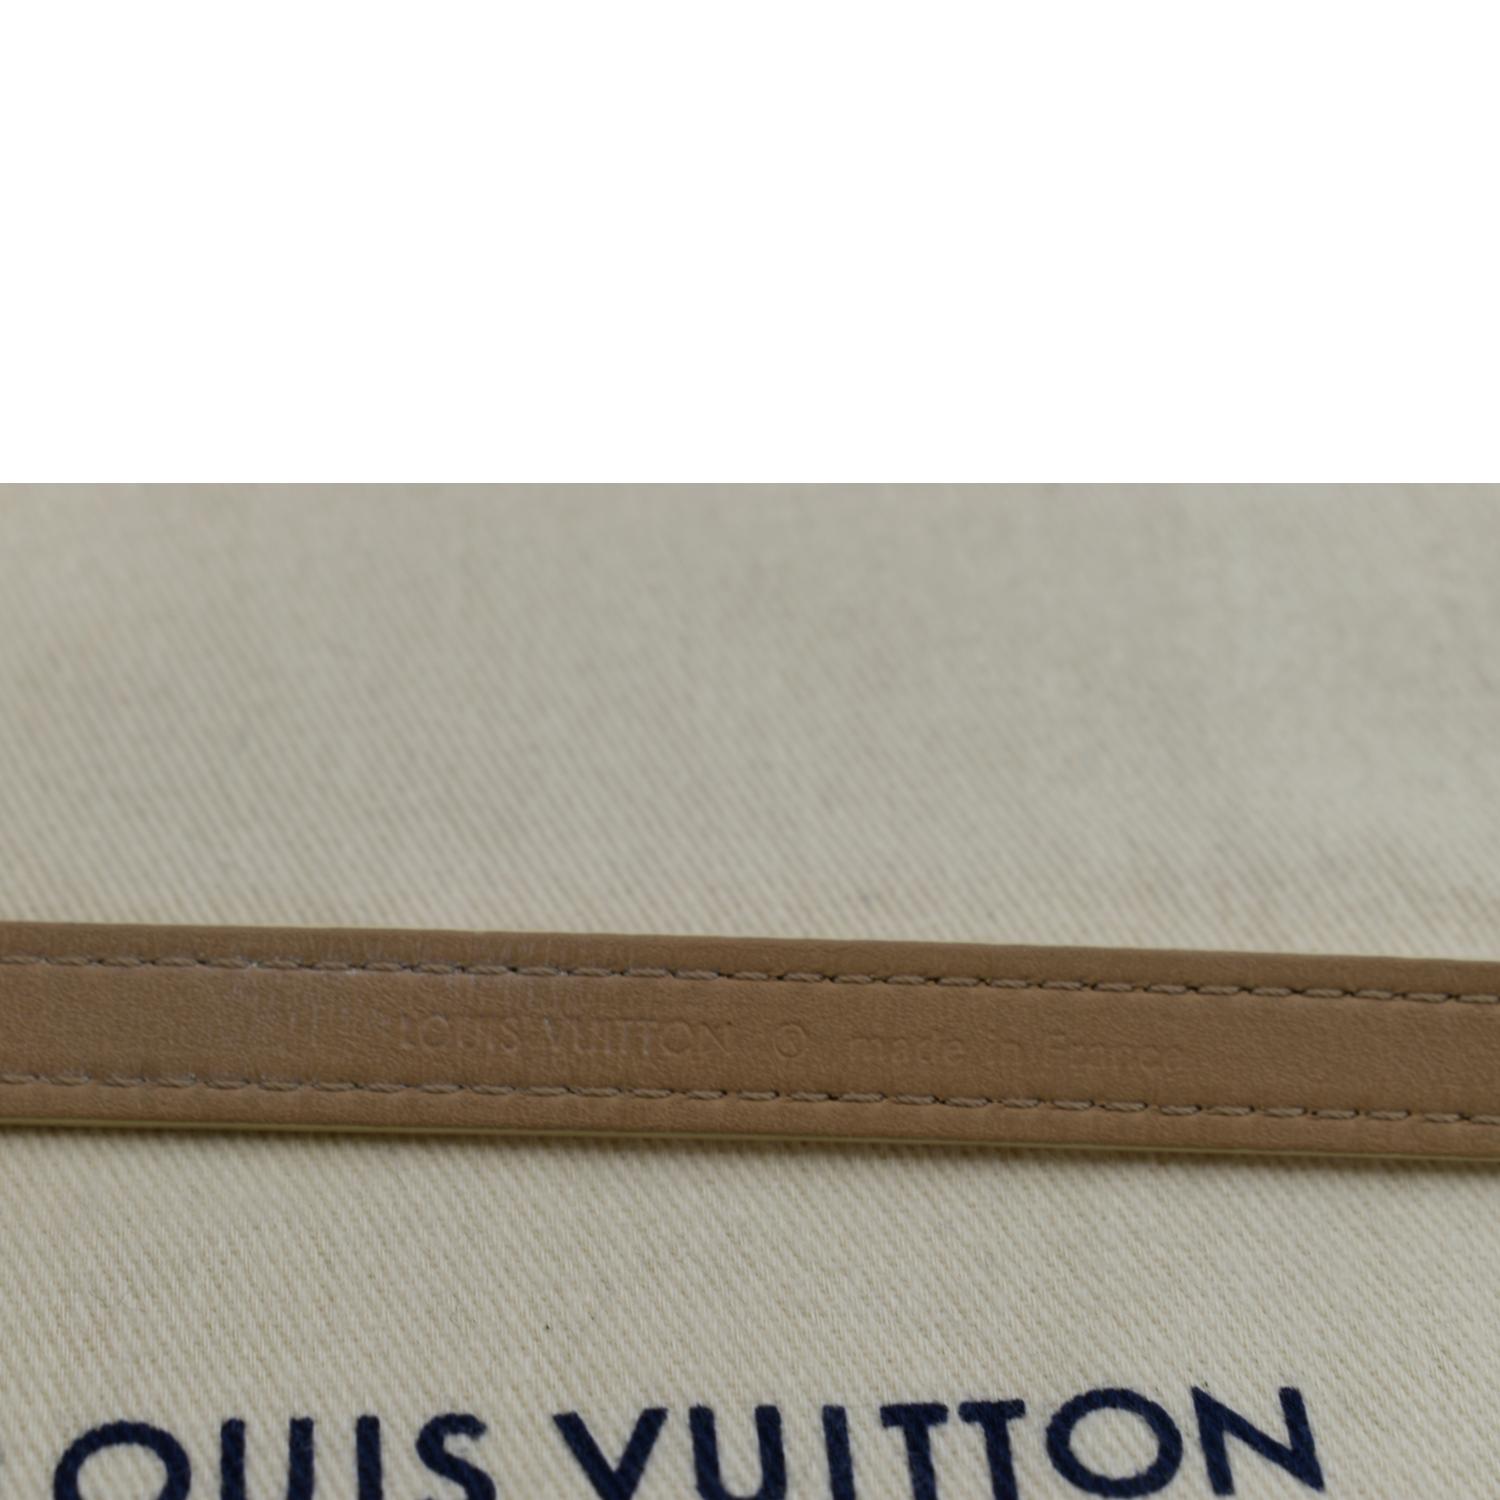 Louis Vuitton Stitching Coming Out